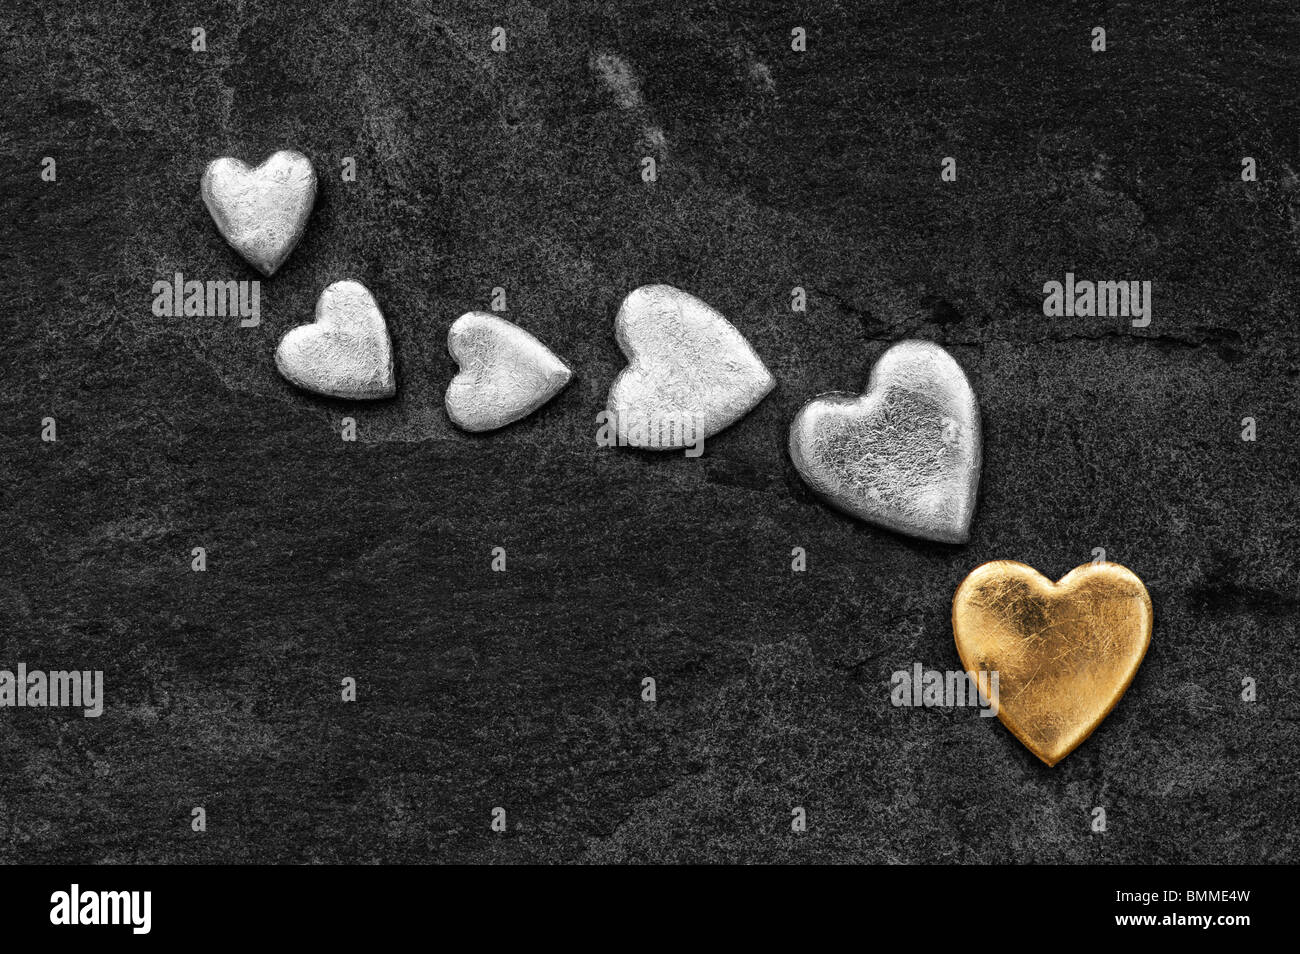 Gold heart shape against slate background with black and white hearts Stock Photo